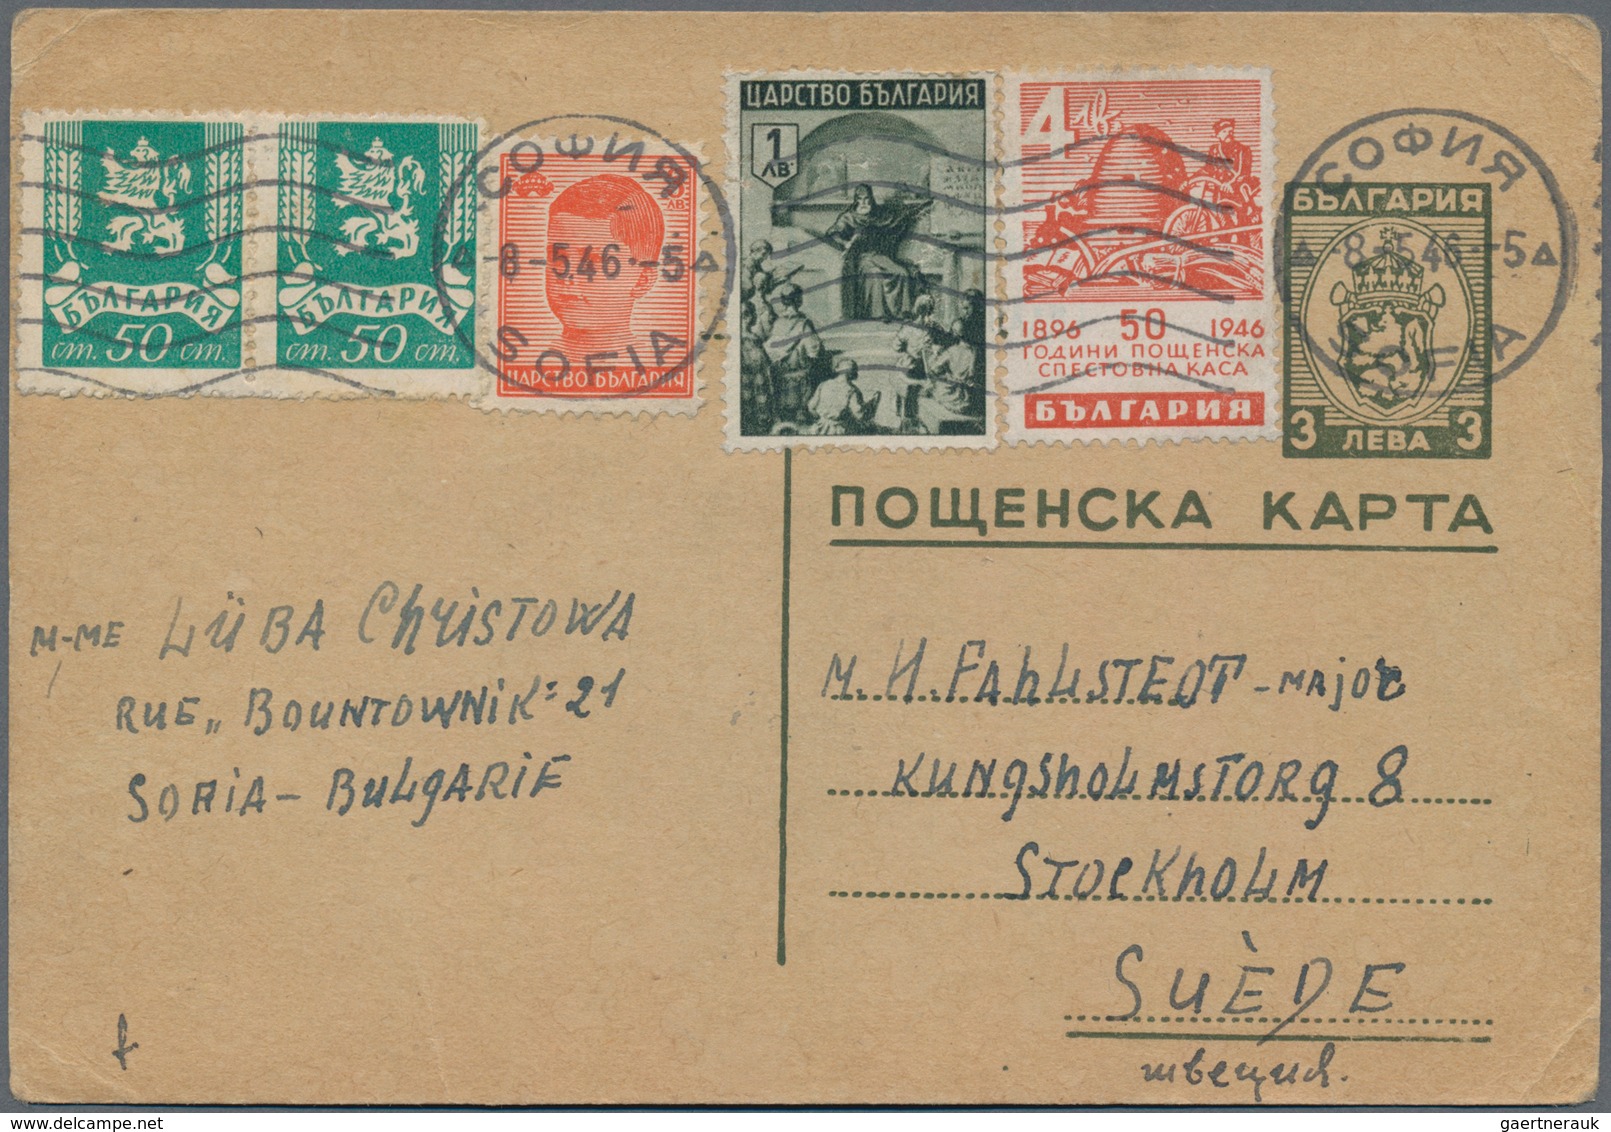 Bulgarien: 1945/1951, assortment of apprx. 115 covers/cards/used stationeries, mainly commercial mai